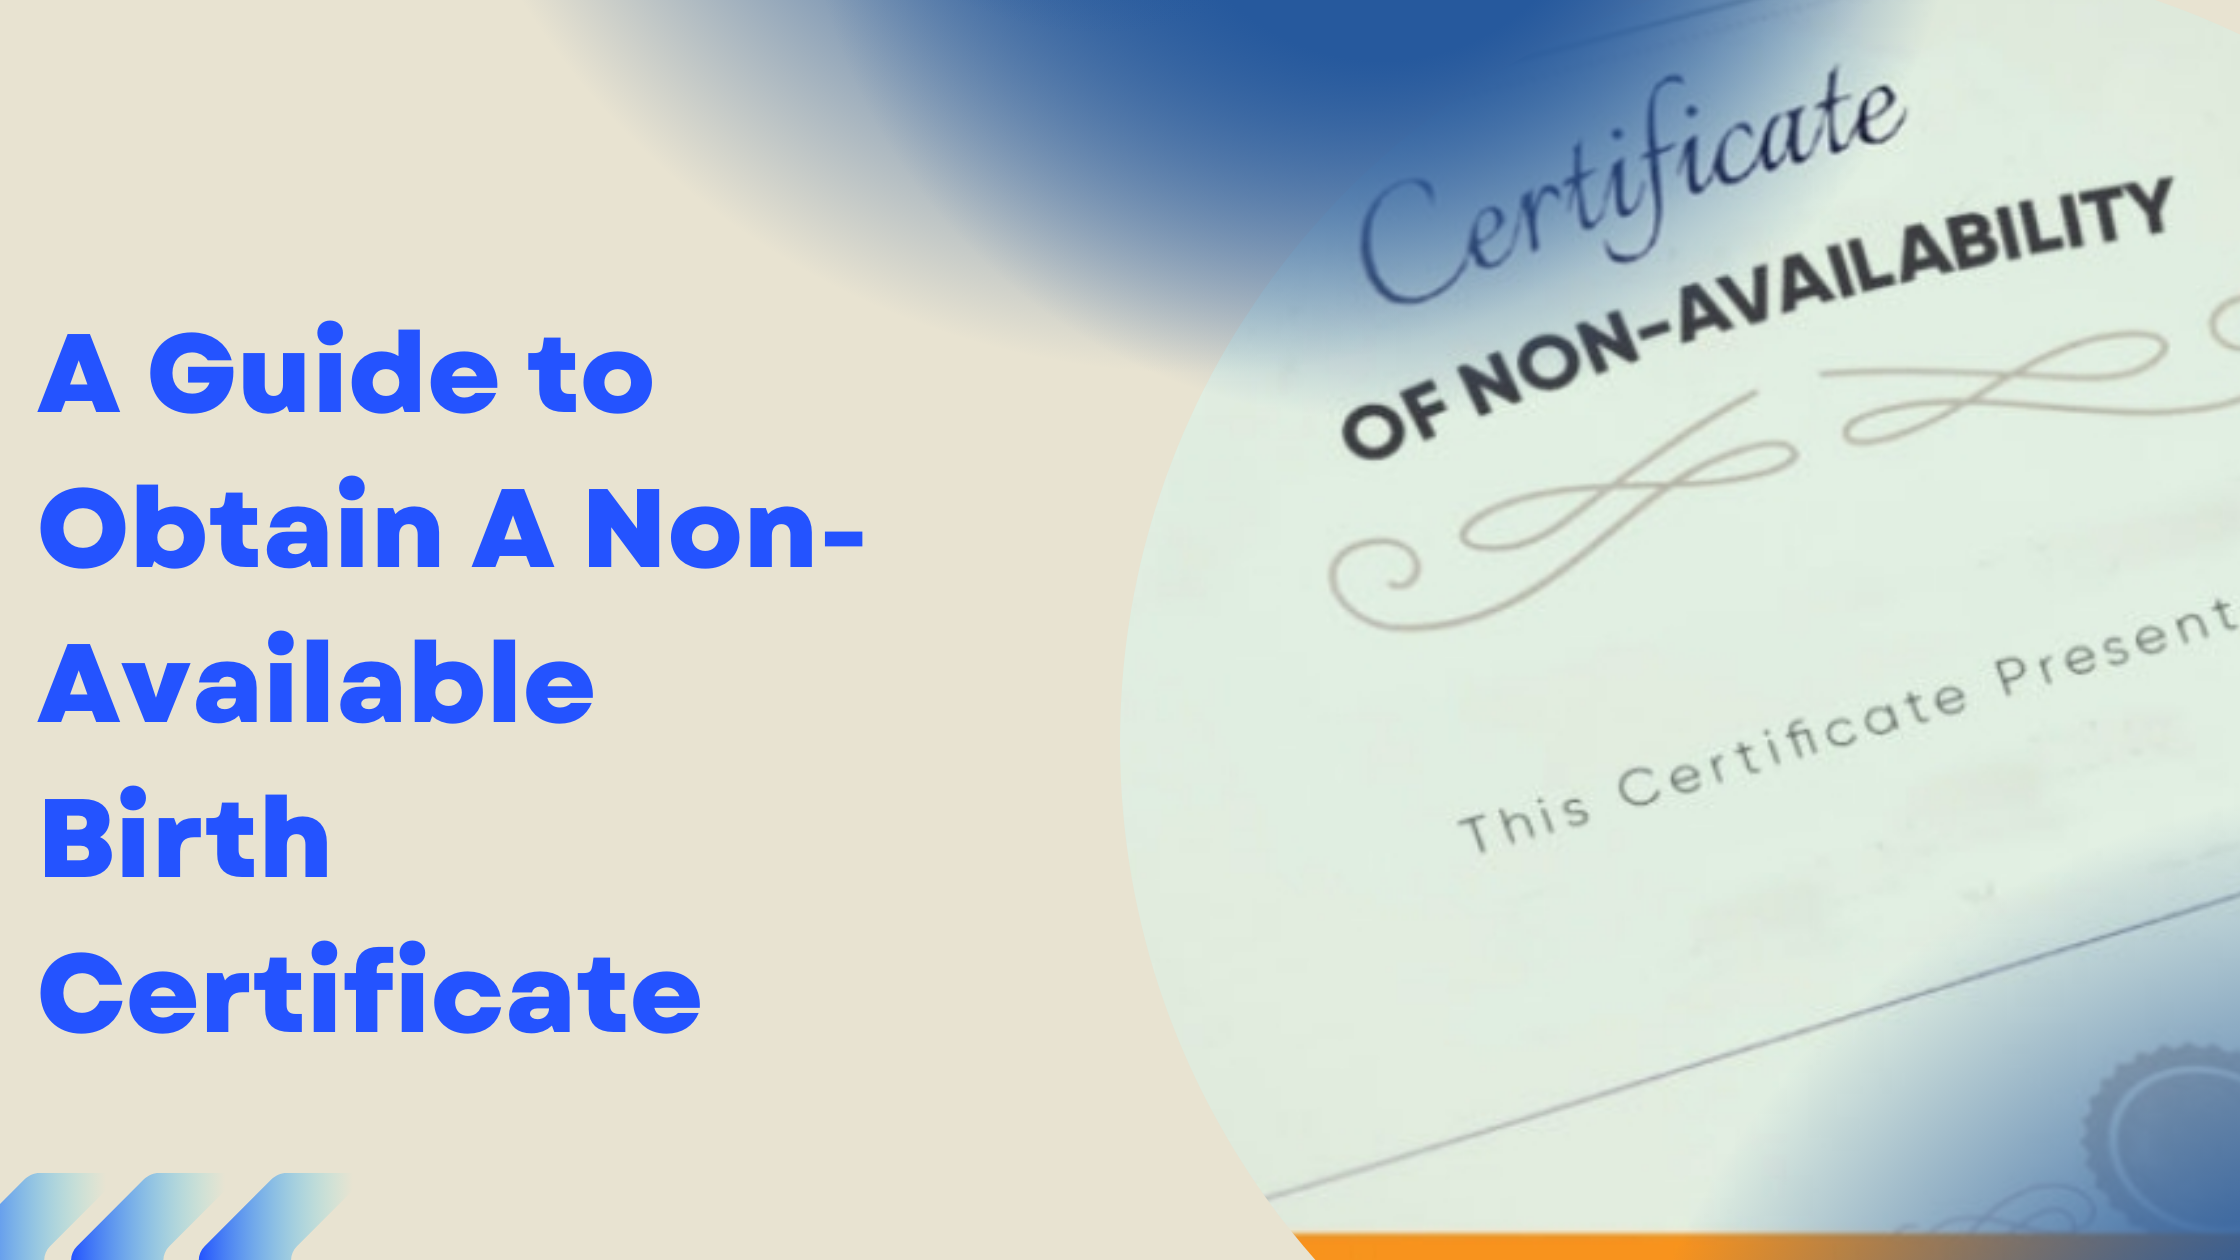 A Guide to Obtain A Non-Available Birth Certificate